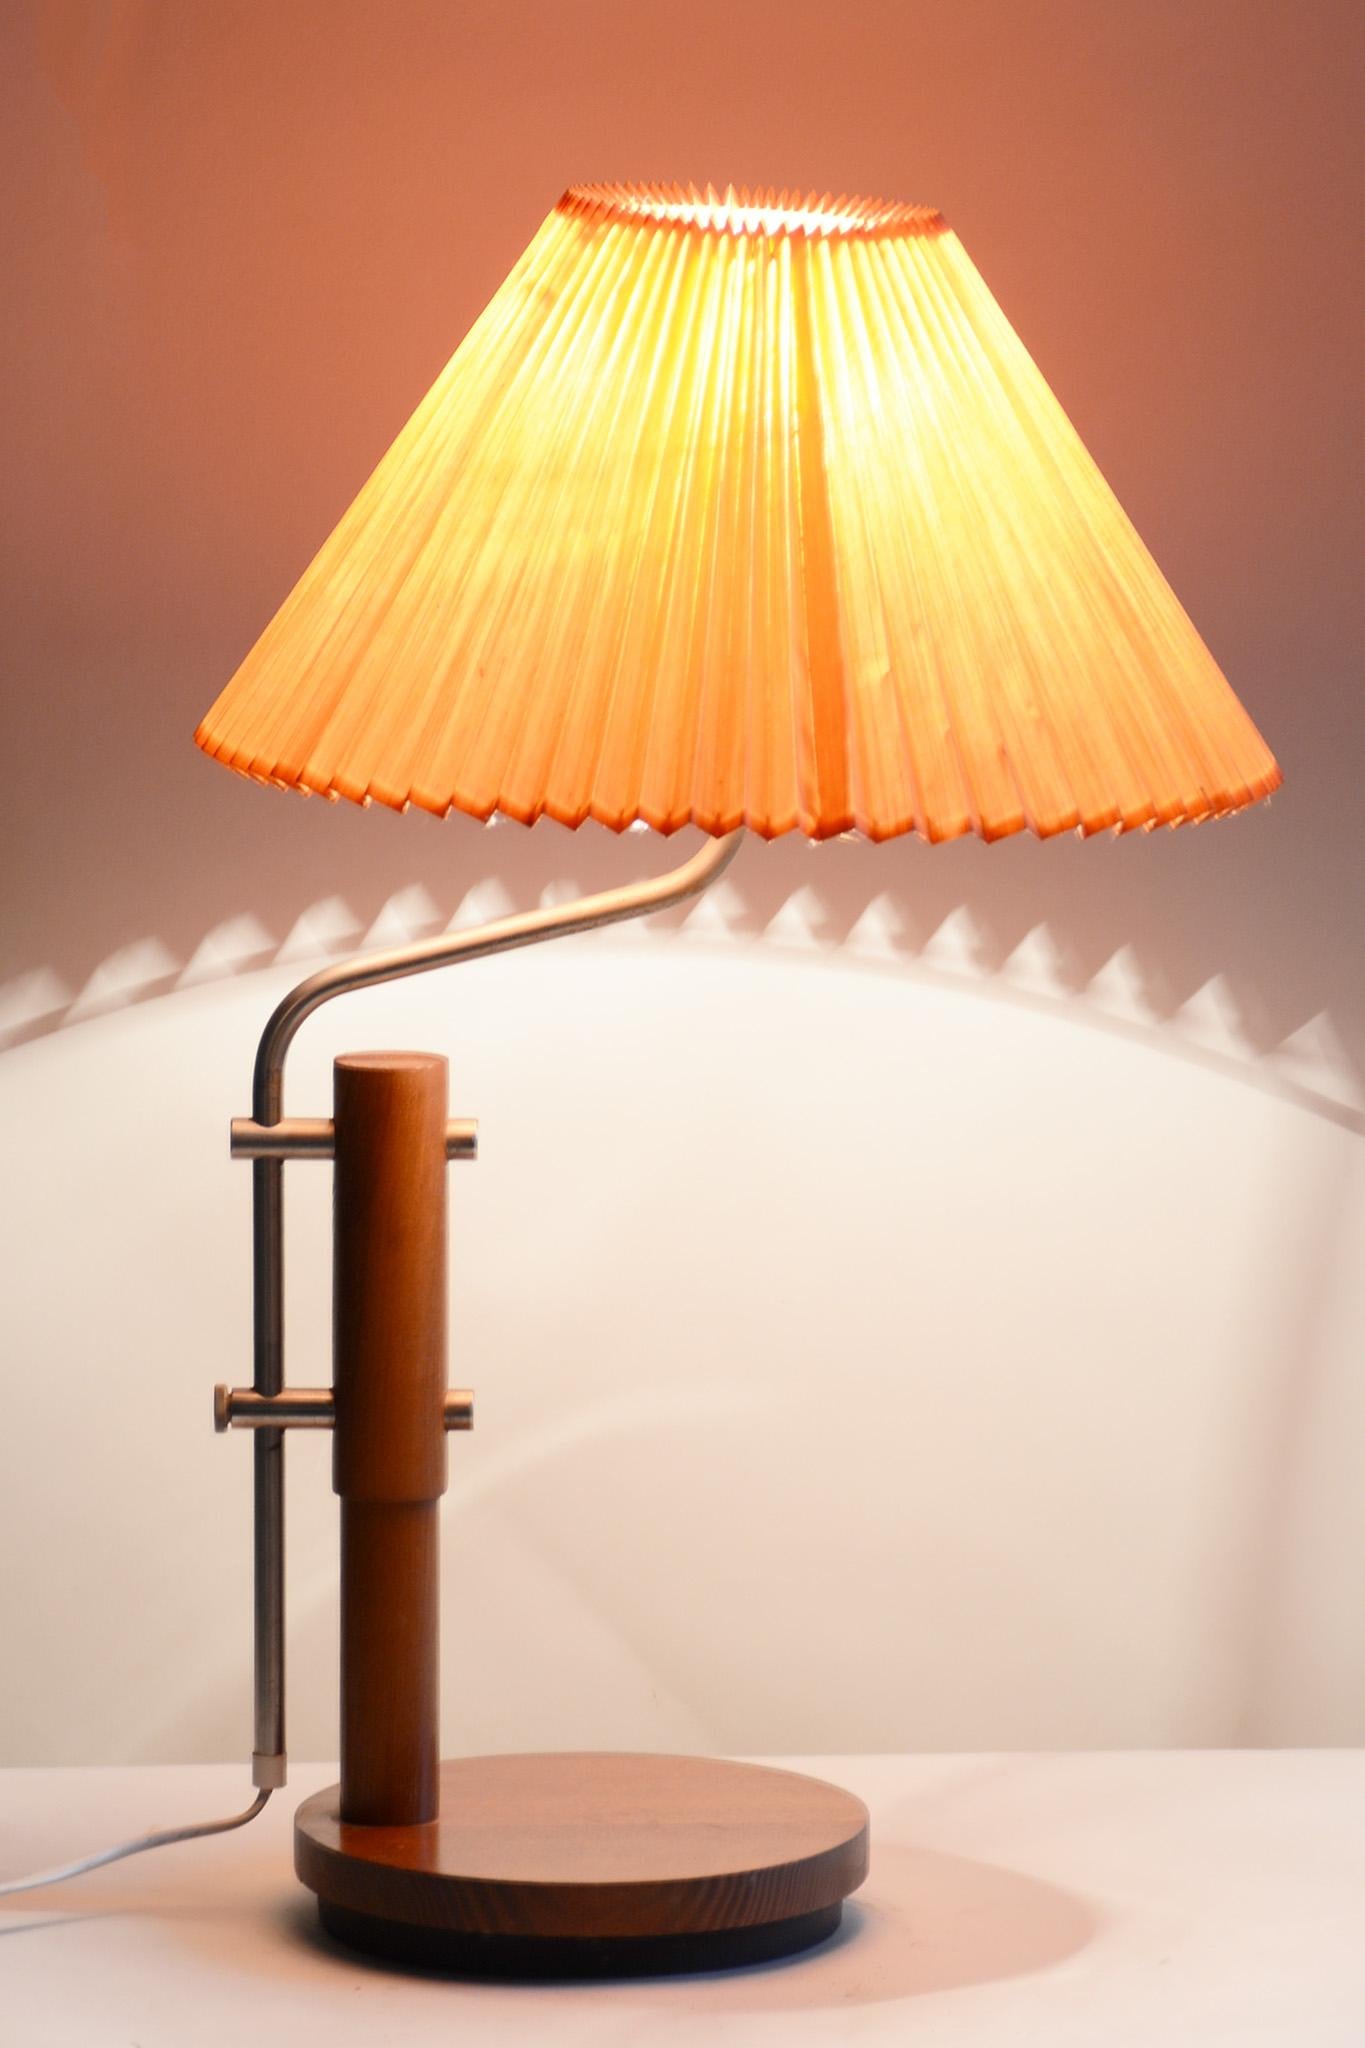 Mid-20th Century Midcentury Table Lamp, Beech Galvanized Metal, Fully Functional, Czechia, 1960s For Sale